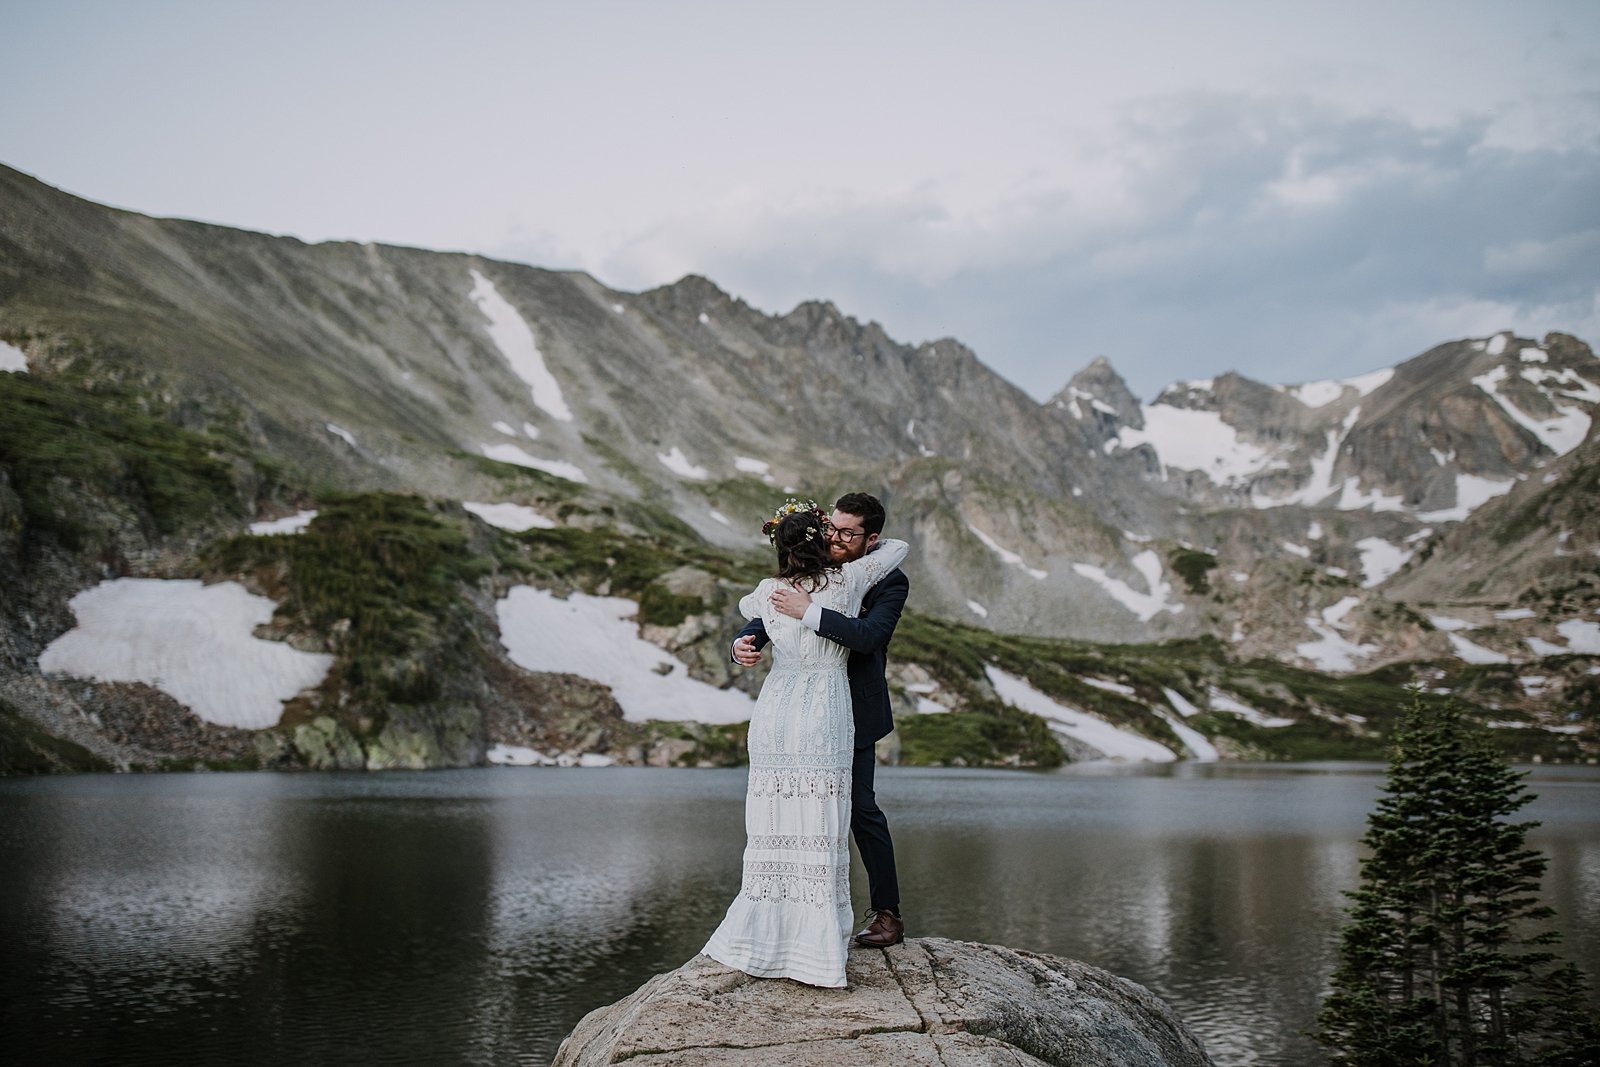 bride and groom elopement first look, bride and groom standing on lake shore, indian peaks wilderness, elopement at lake isabelle, backcountry trekking elopement, glacier valley elopement